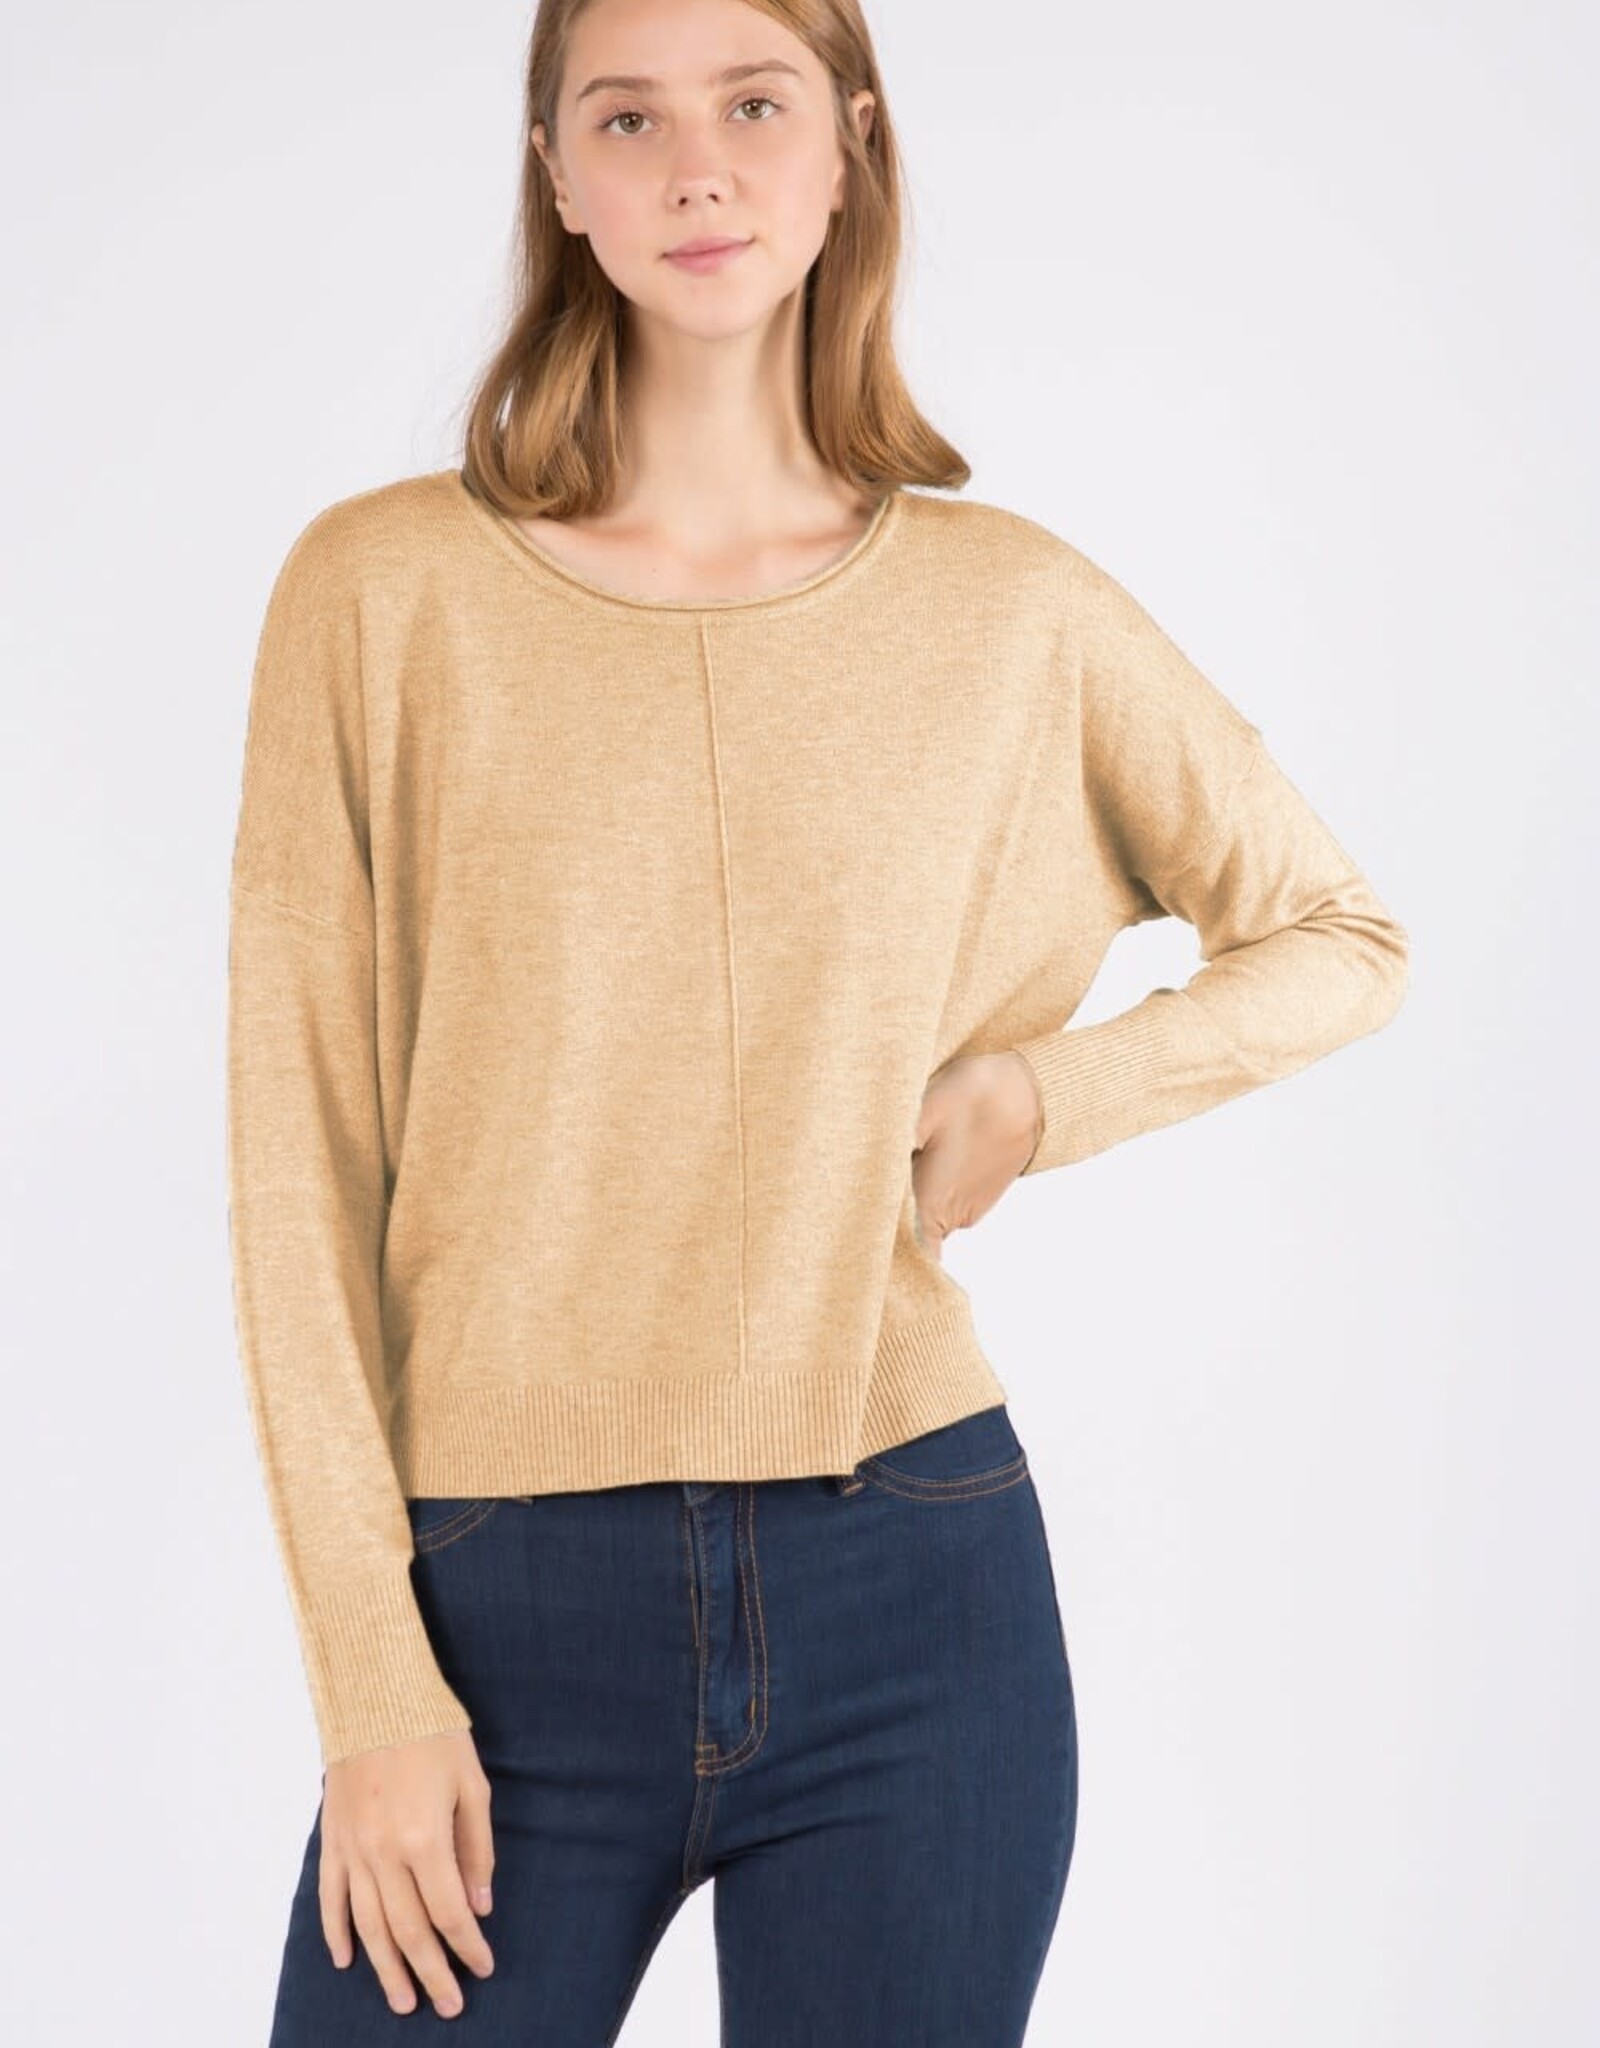 Miss Bliss Dreamers Round Neck Pullover